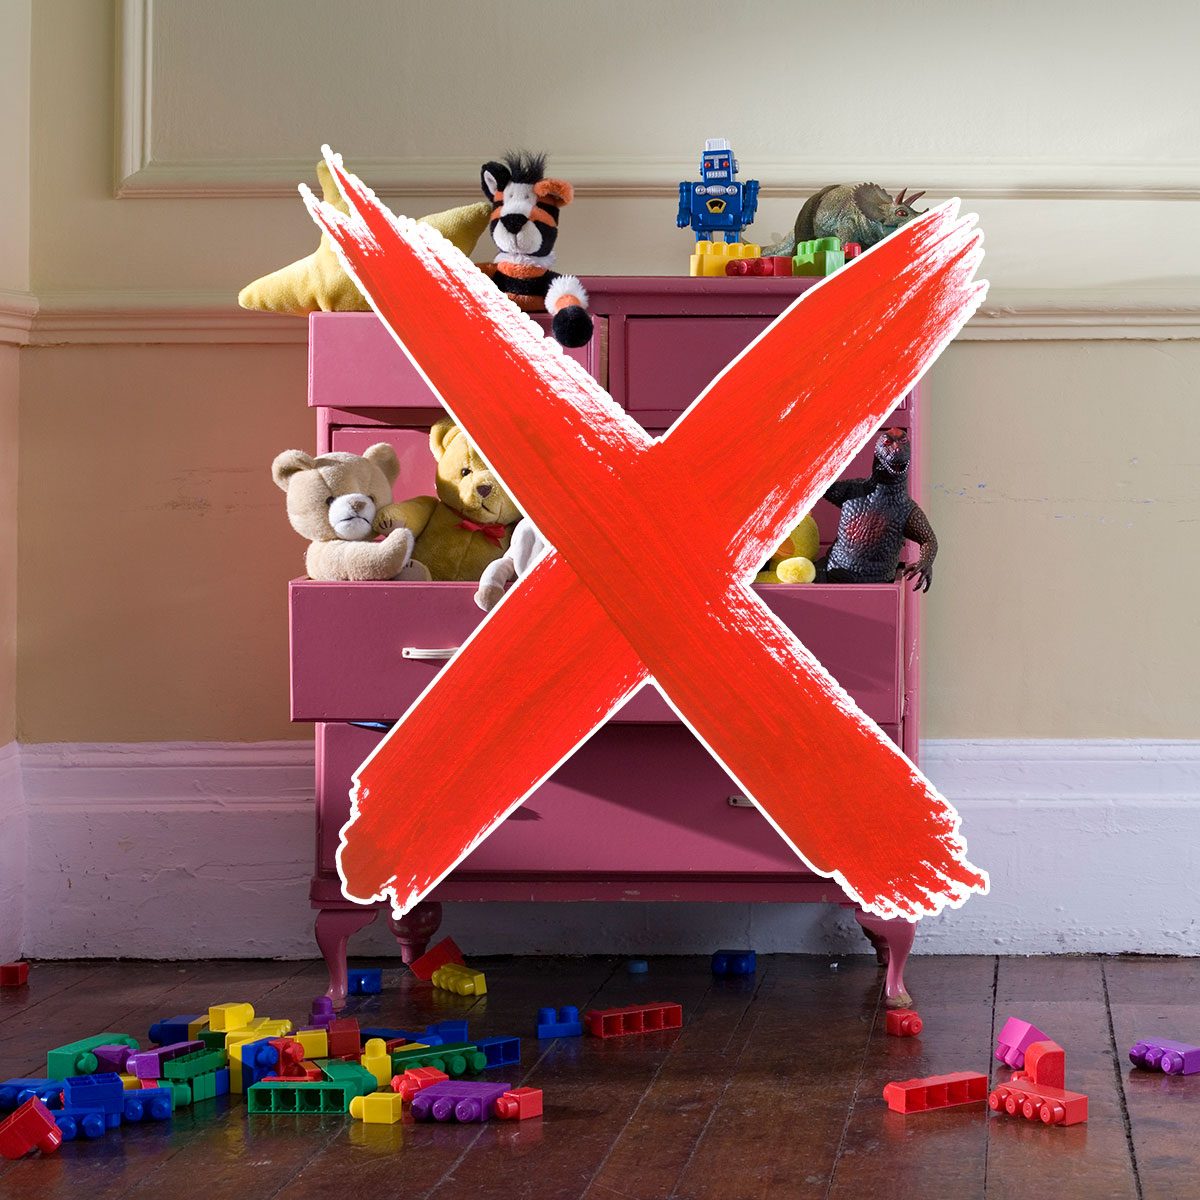 Dresser filled with toys and a red "x" over it